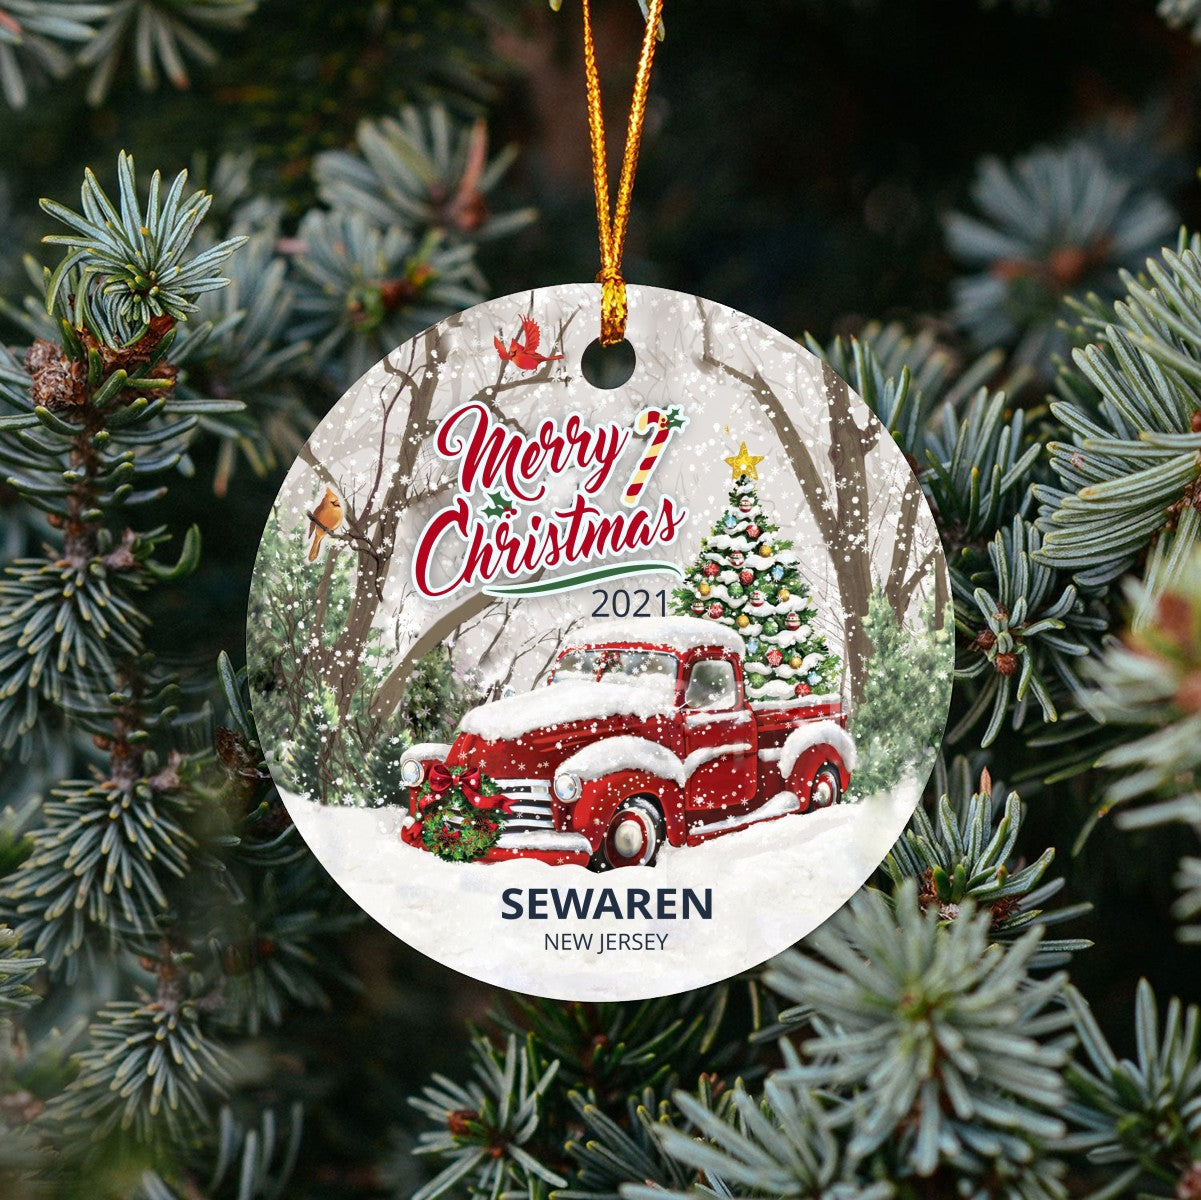 Christmas Tree Ornaments Sewaren - Ornament With Name City, State Sewaren New Jersey NJ Ornament - Red Truck Xmas Ornaments 3'' Plastic Gift For Family, Friend And Housewarming